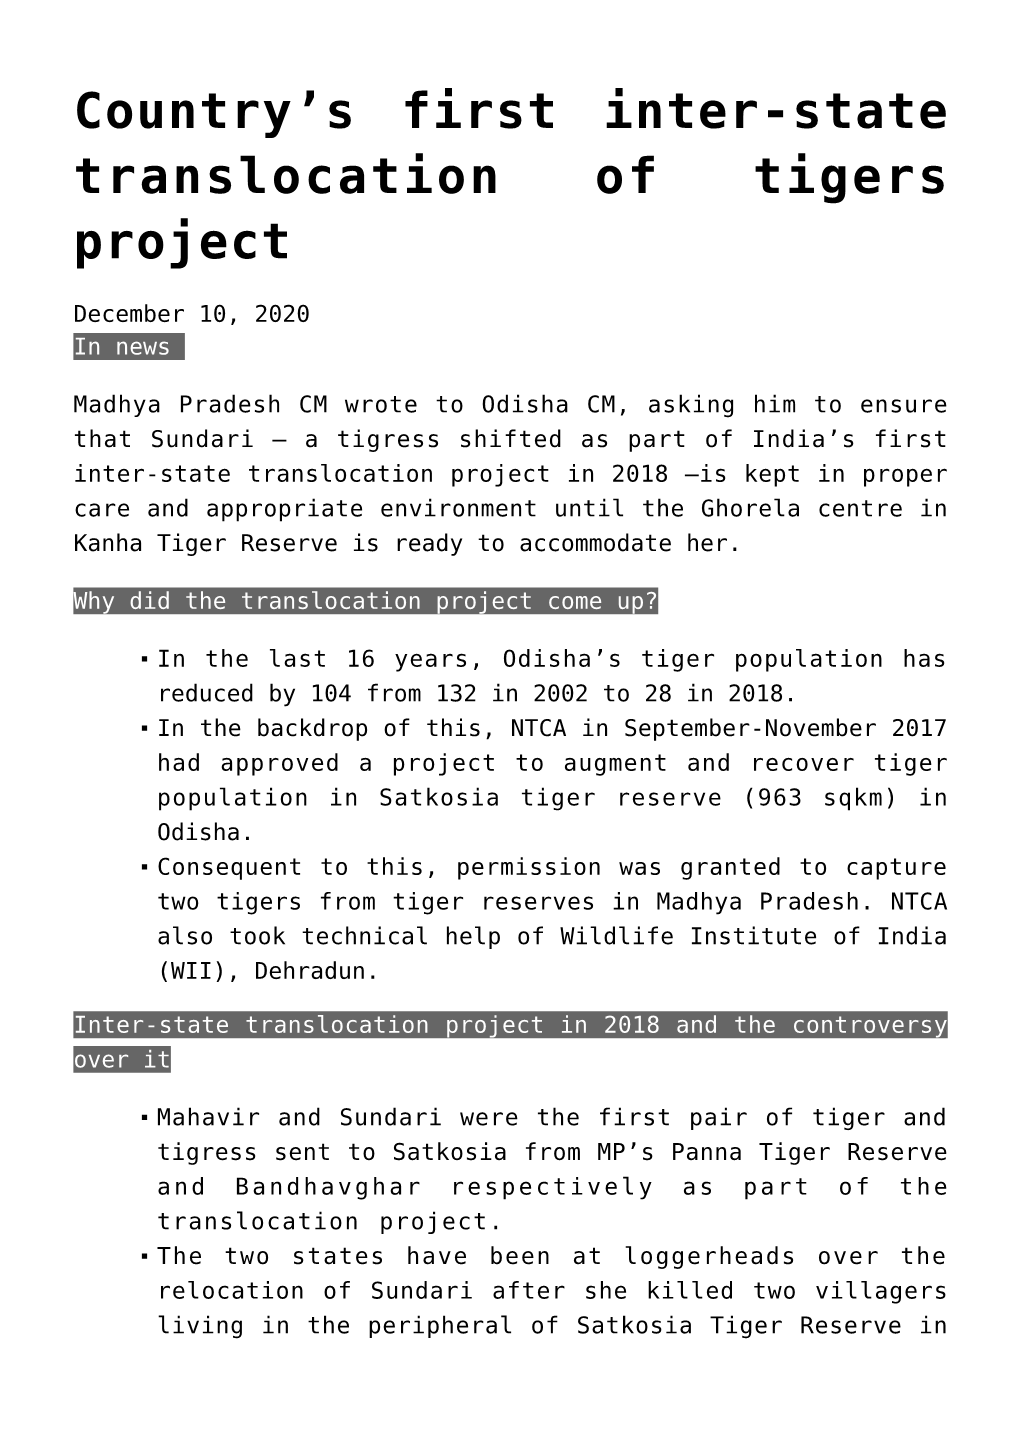 Country's First Inter-State Translocation of Tigers Project